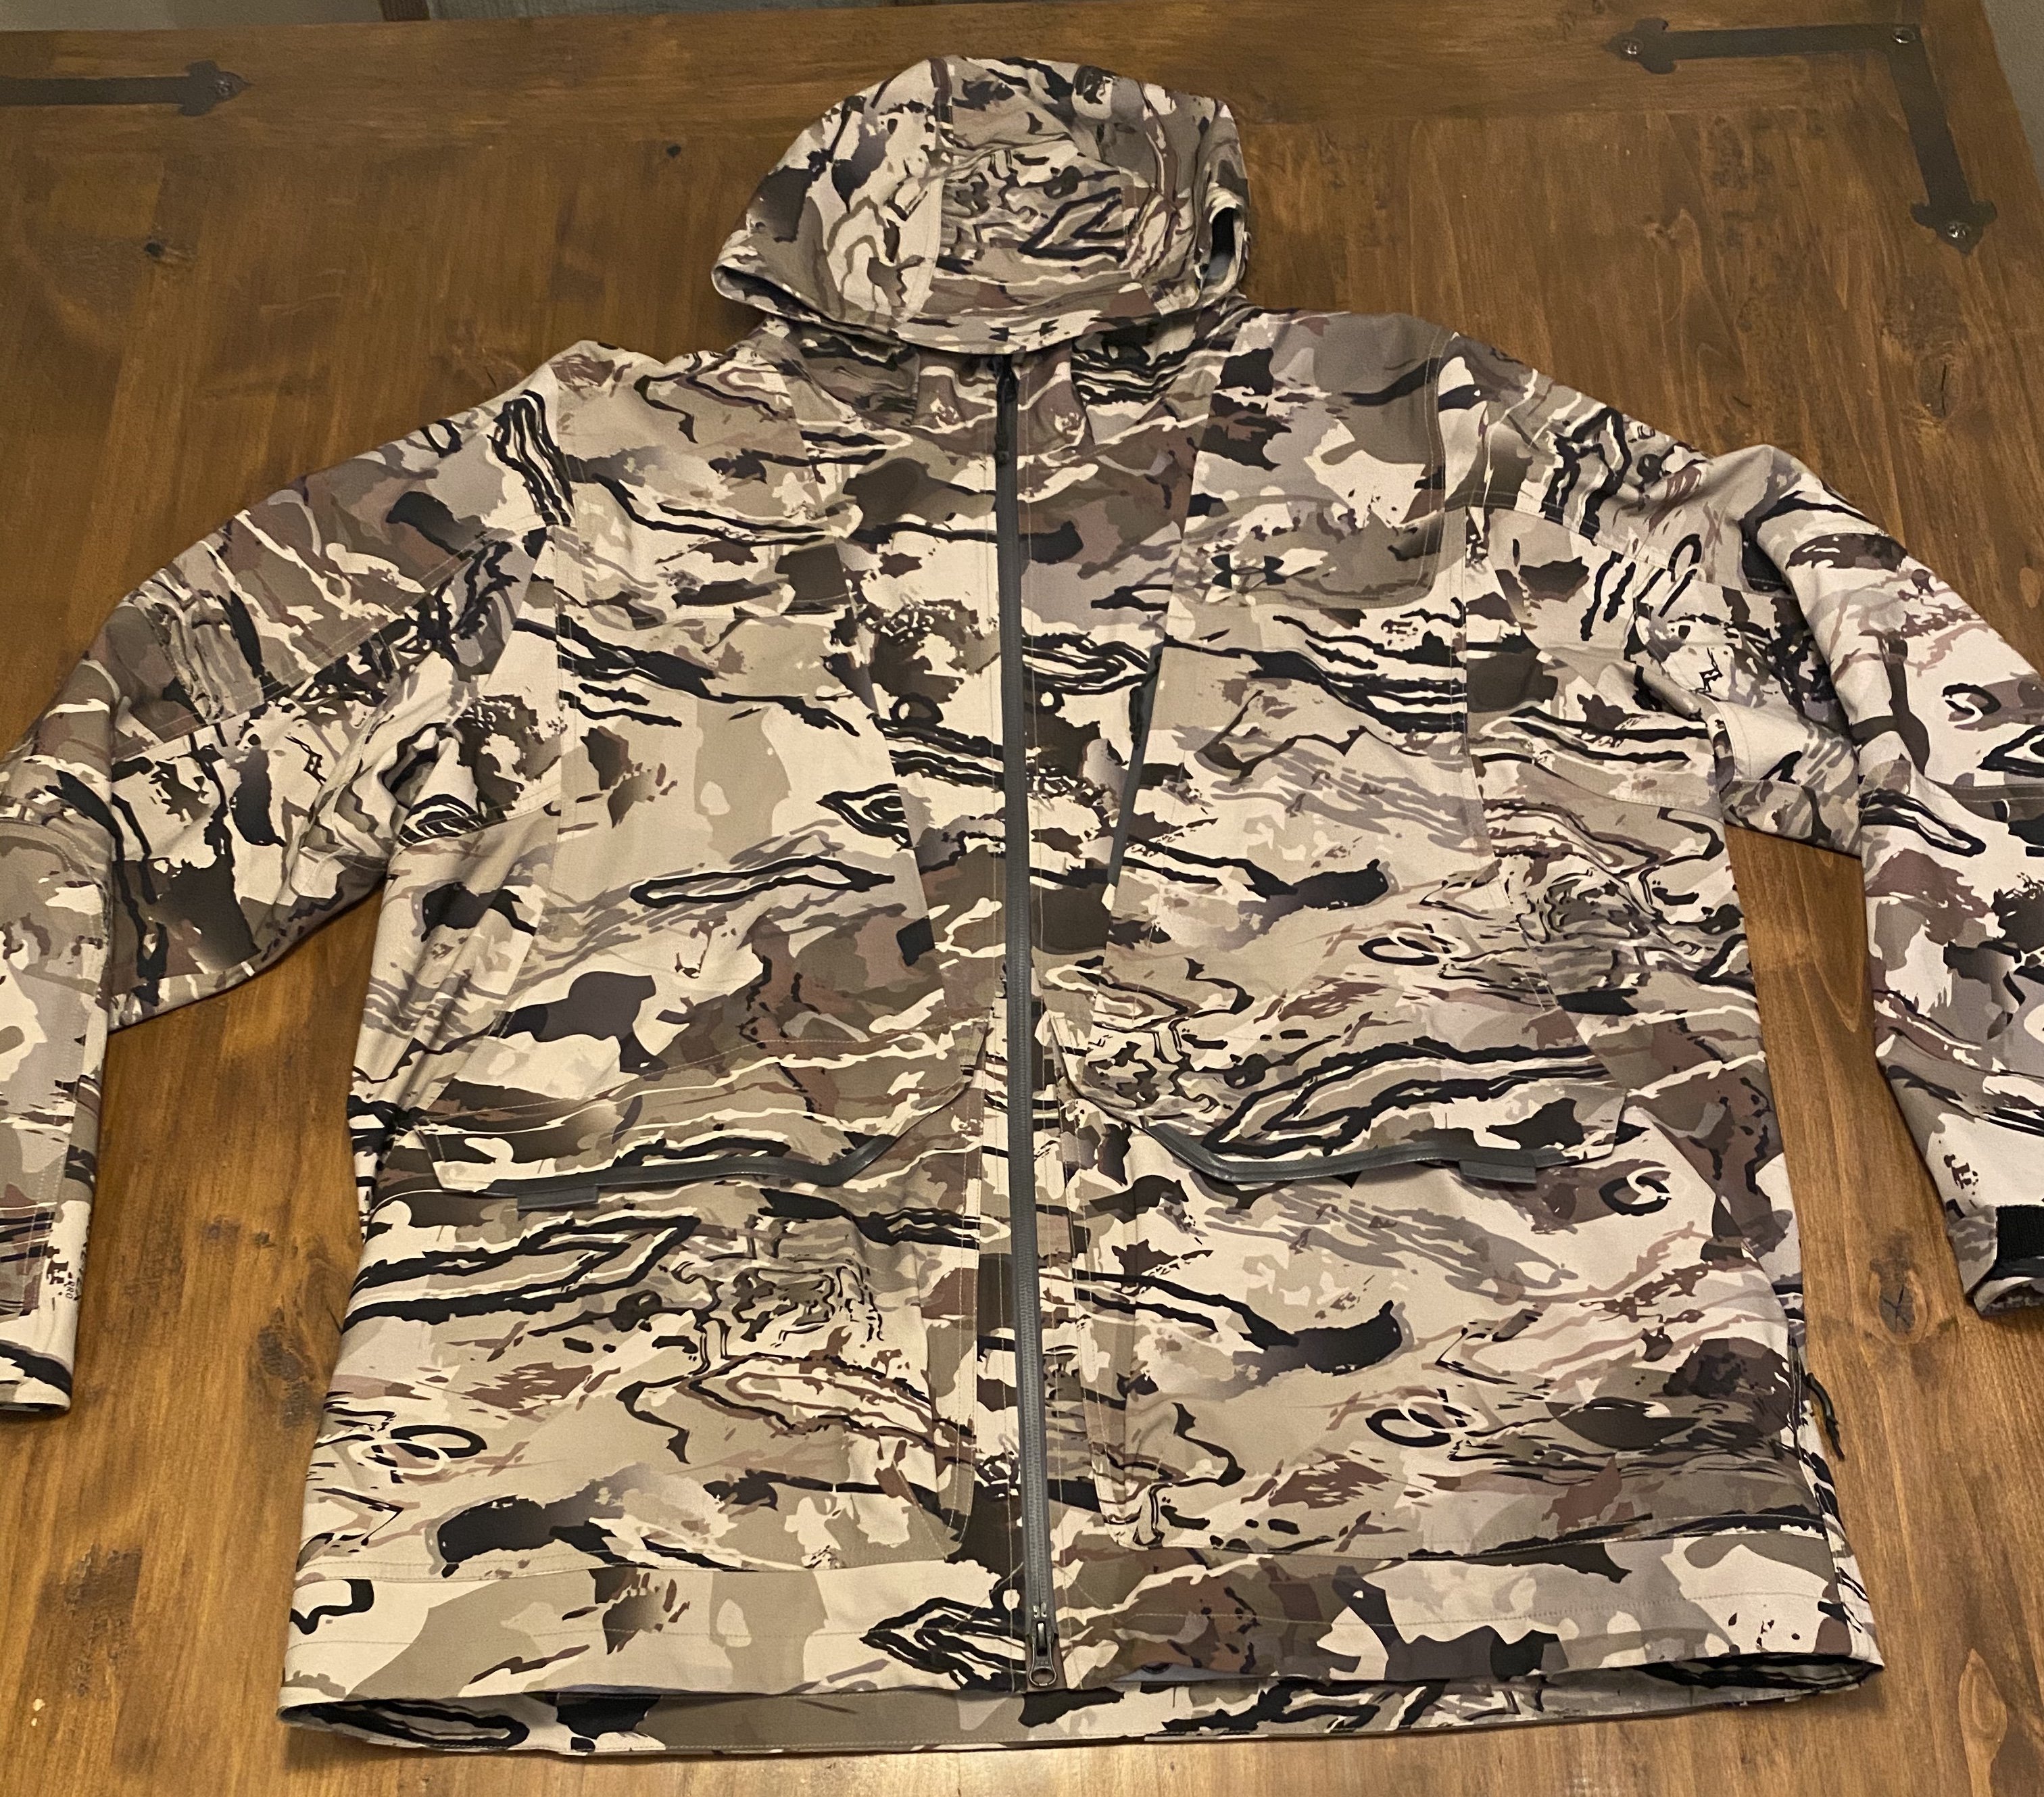 Mens Under Armour Camo Barren Hunting Gear - Classified Ads ...